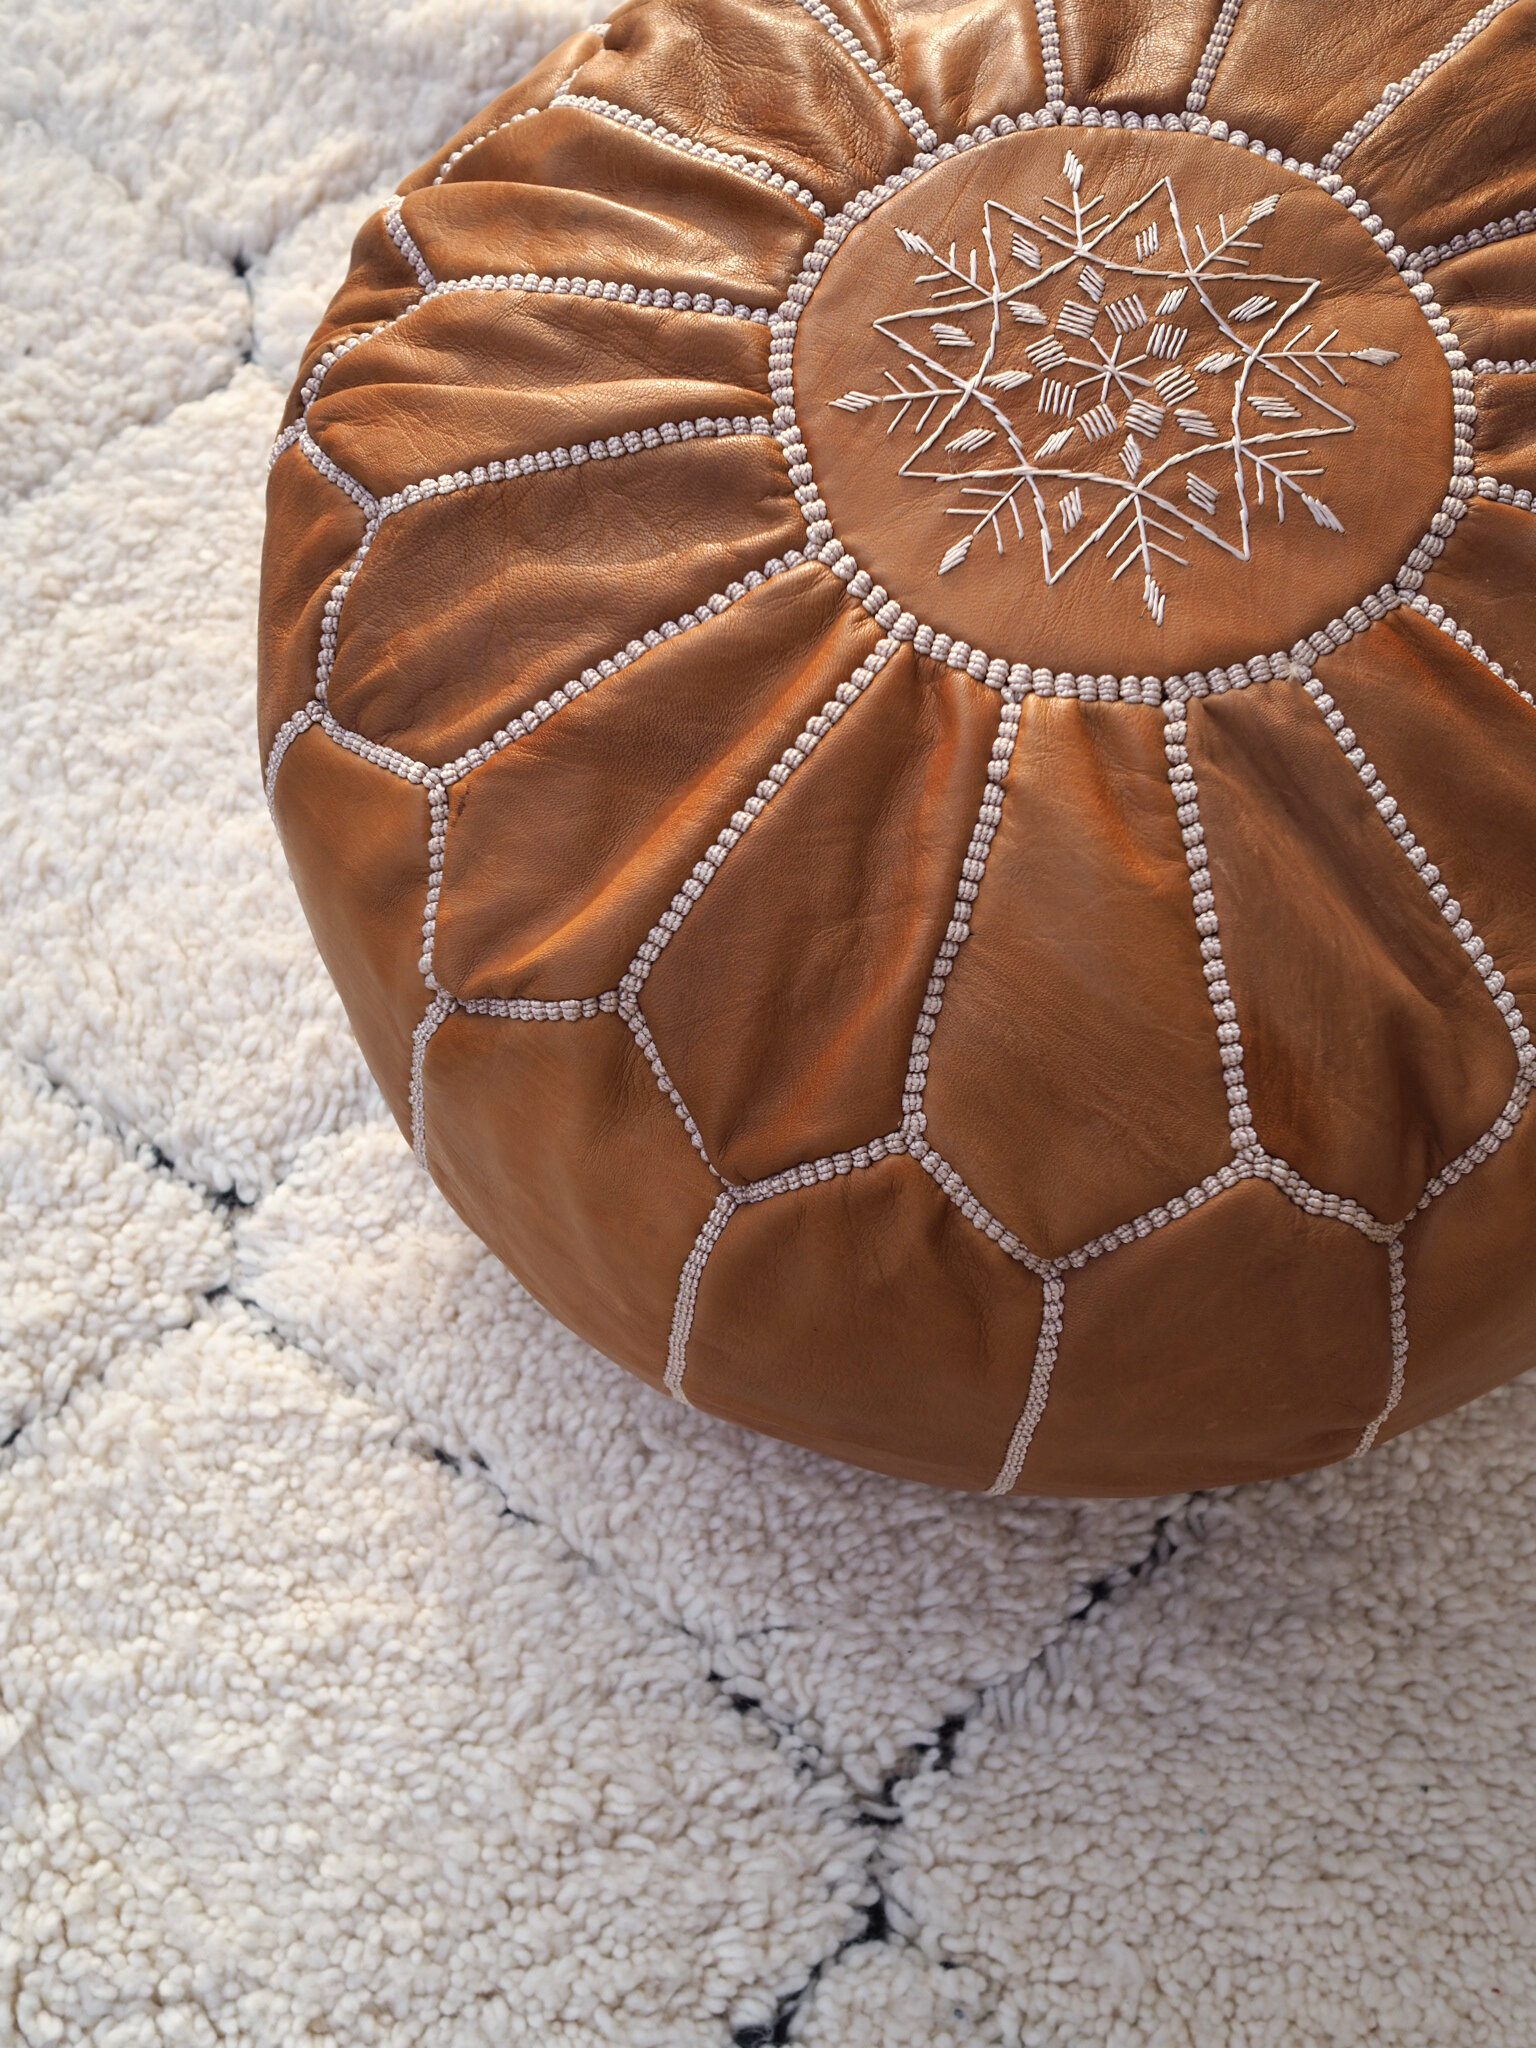 pouf moroccan leather pouf morrocan ottoman leather,genuine leather,handmade pouf,gift gift pouf,berber pouf,ottoman pouf genuine pouf